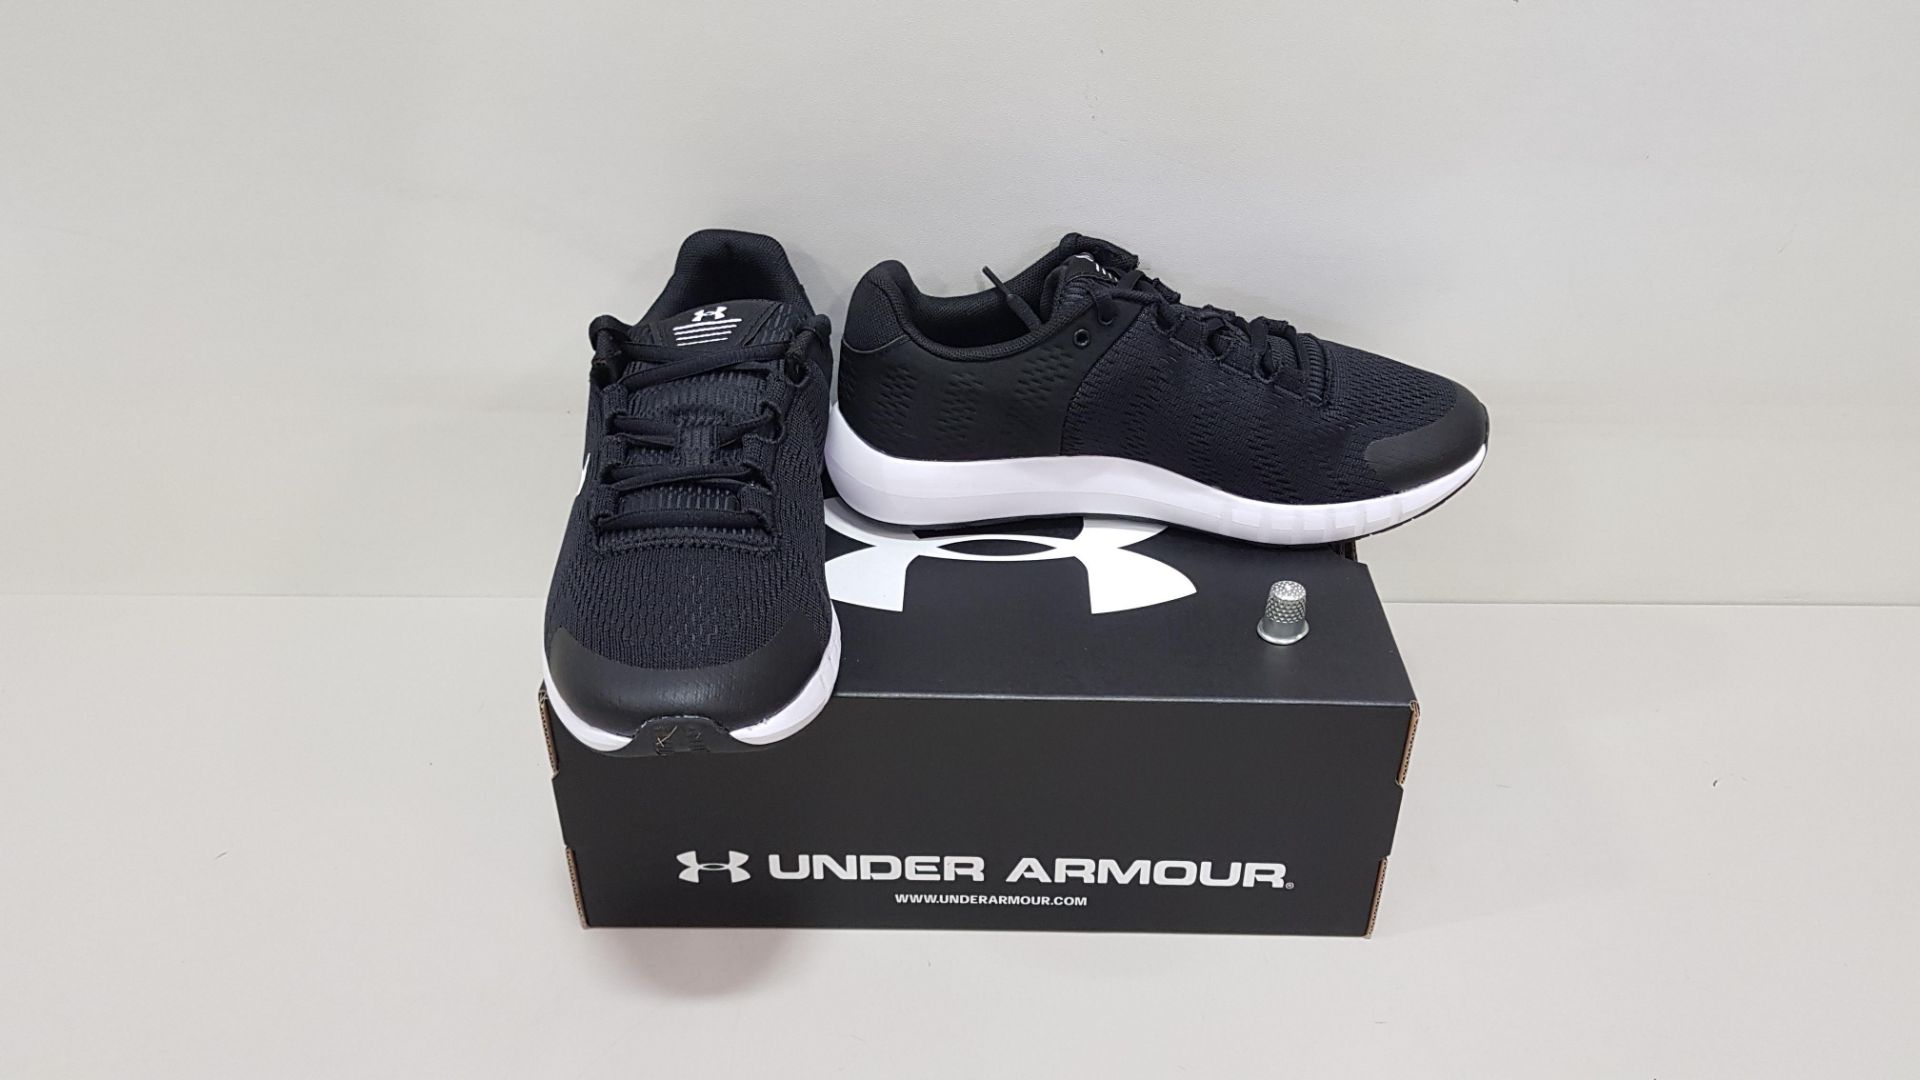 6 X BRAND NEW UNDER ARMOUR W MICRO G PURSUIT BP TRAINERS UK SIZE 5